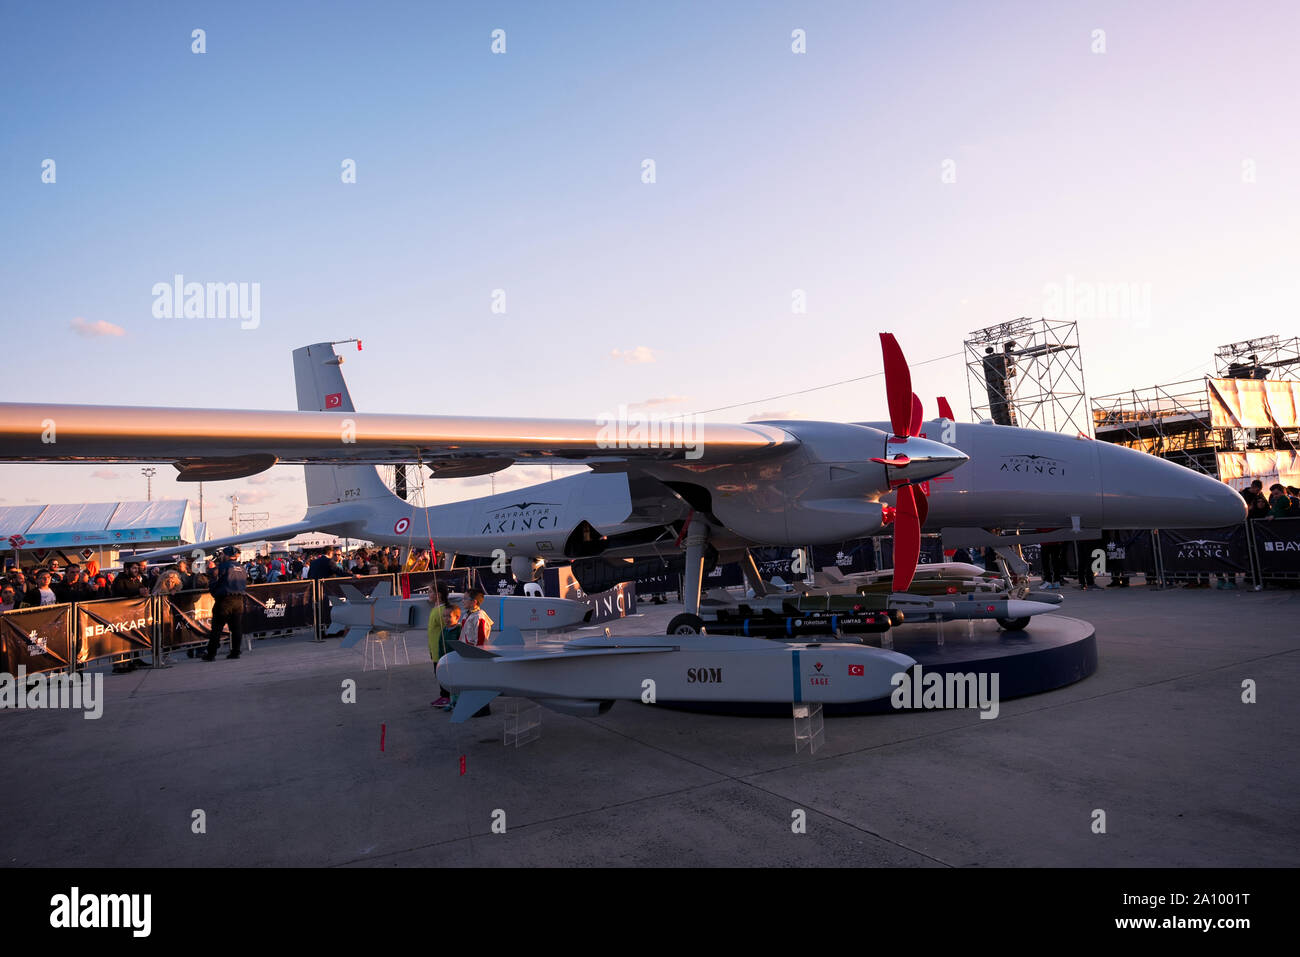 Teknofest 2019 military air force technologies show in Ataturk Airport, Istanbul, Turkey. September 21, 2019 Stock Photo